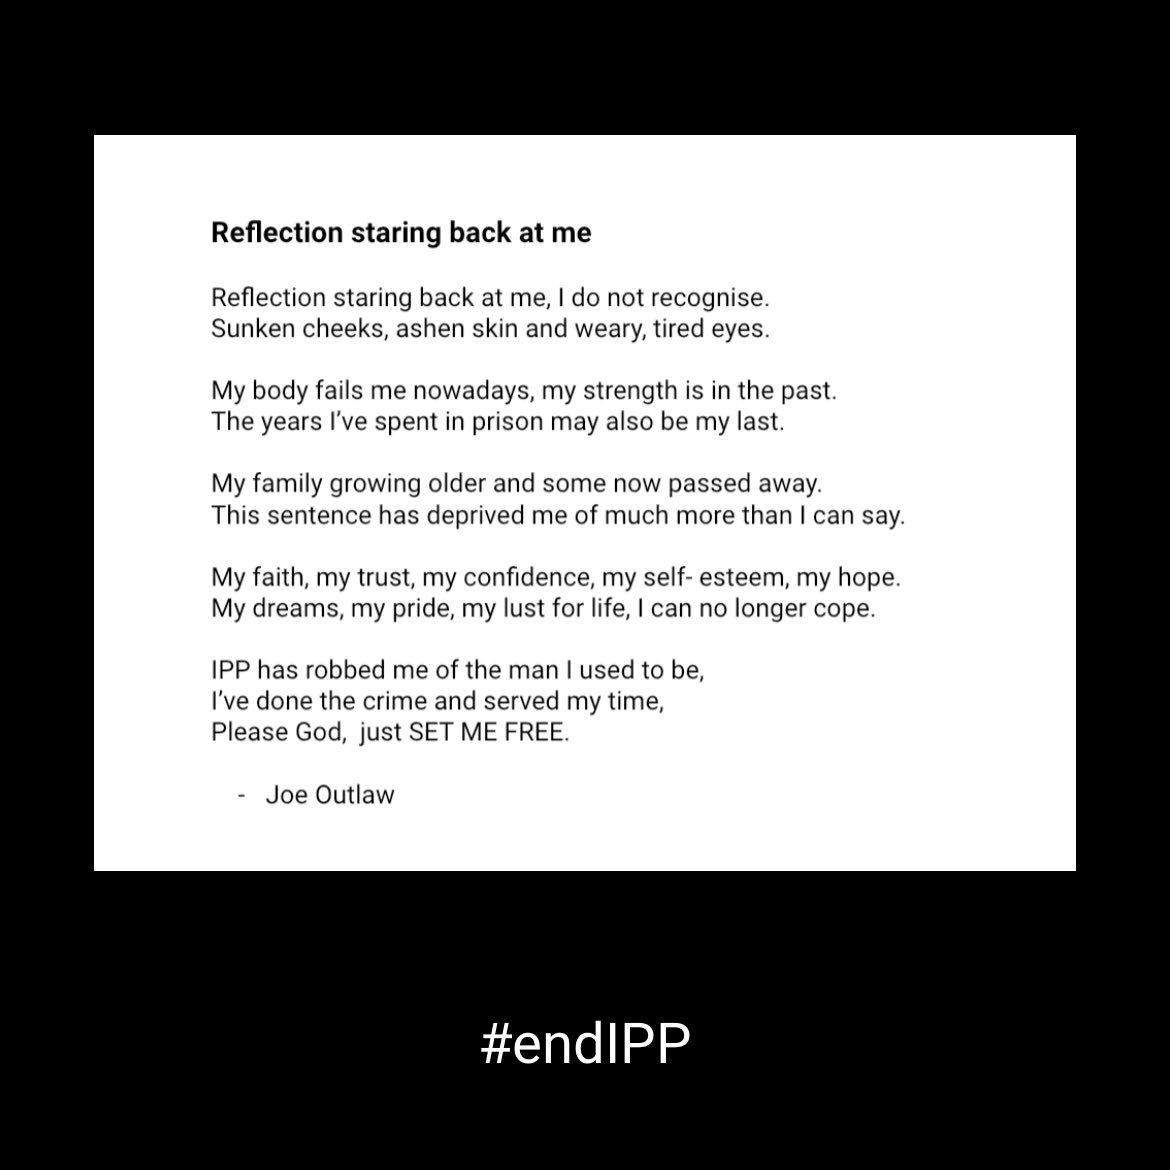 From the exhibition ‘Abolished but not gone’ that was held in Parliament last week. A poem shared with us by Joe Outlaw who is trapped in prison on IPP. Please ask your MP to support resentencing. #endipp